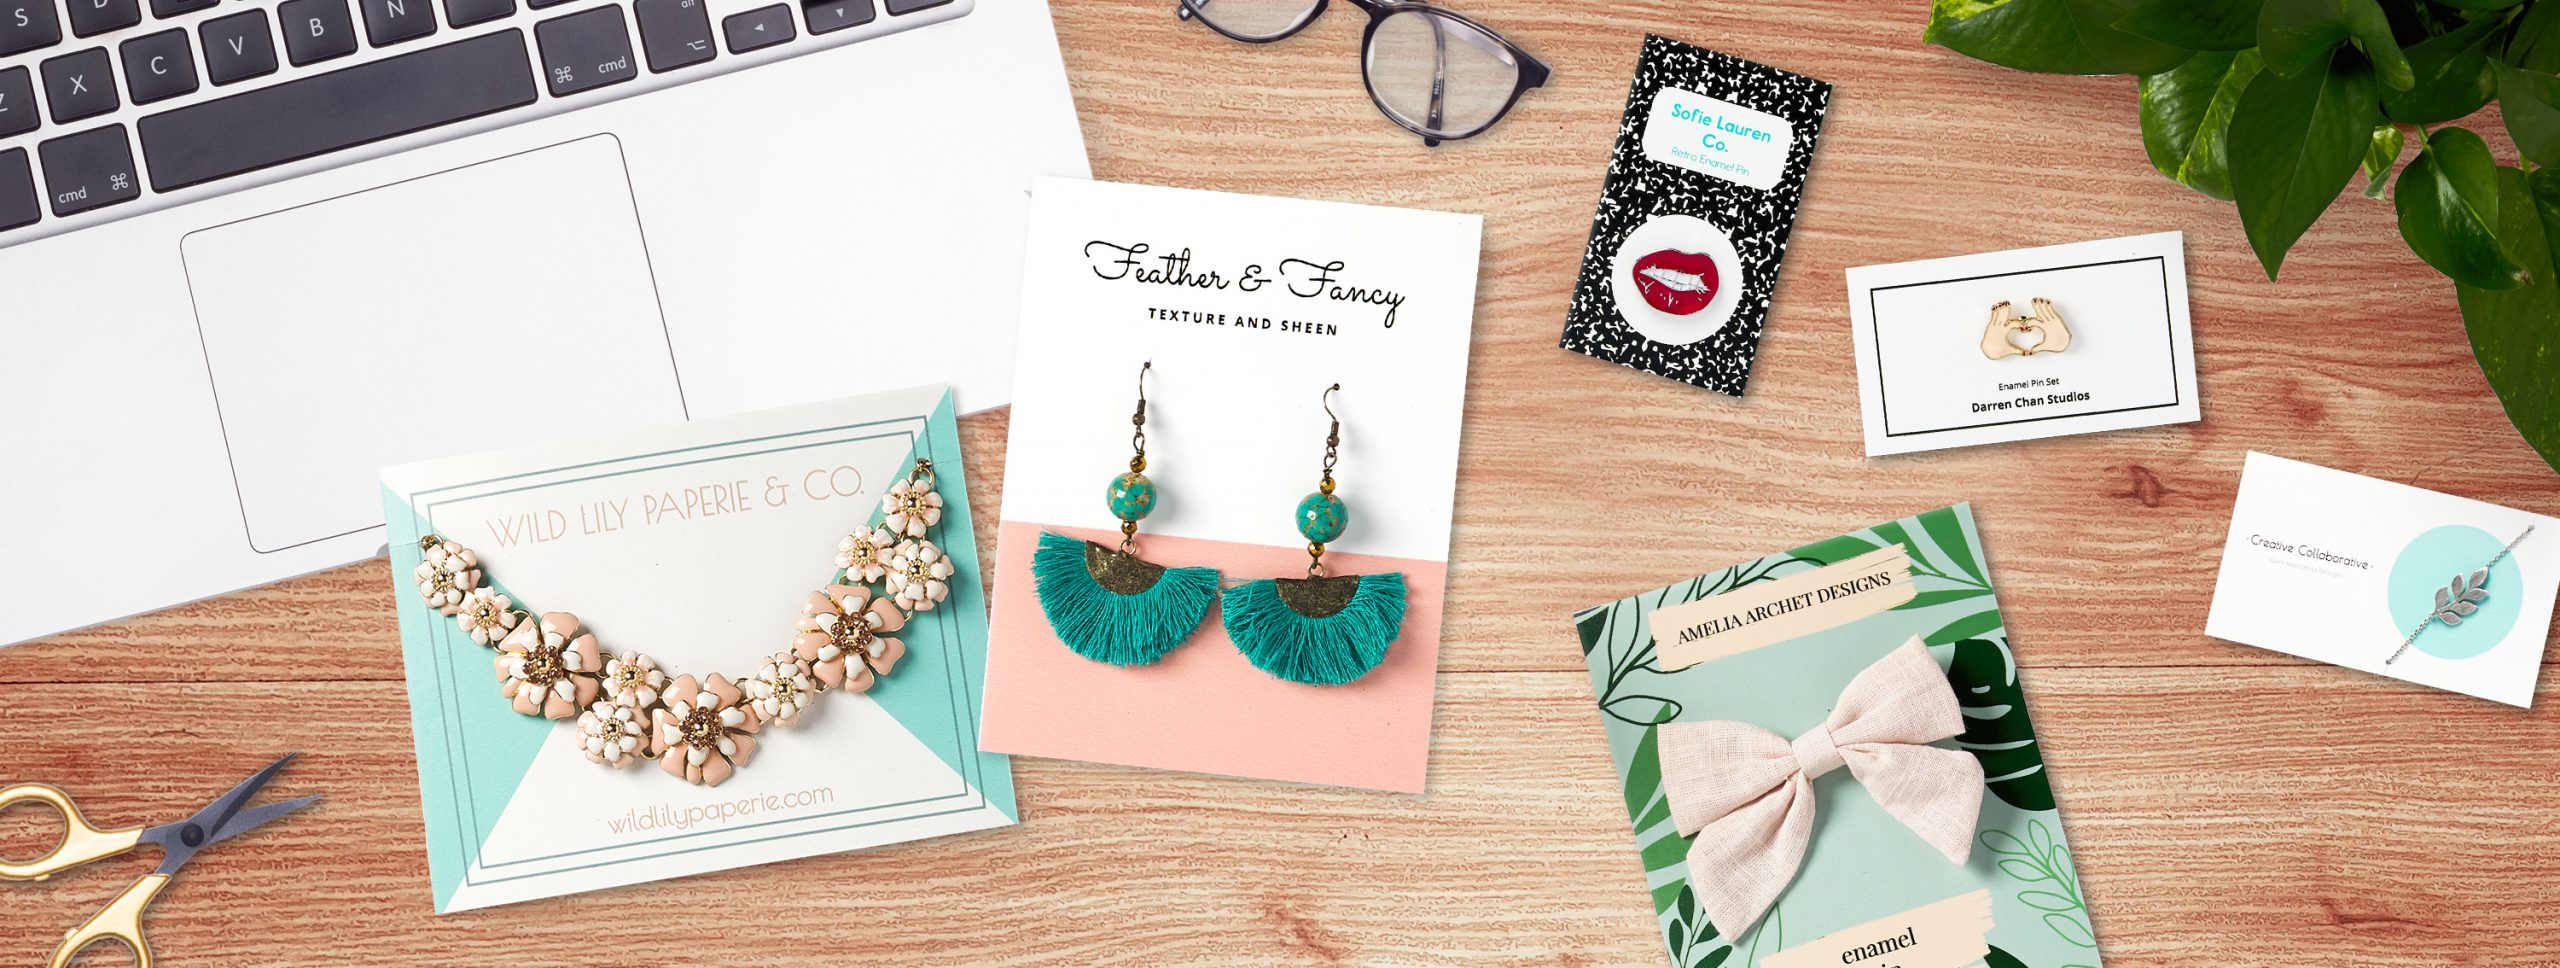 how to make your own jewelry display cards - avery